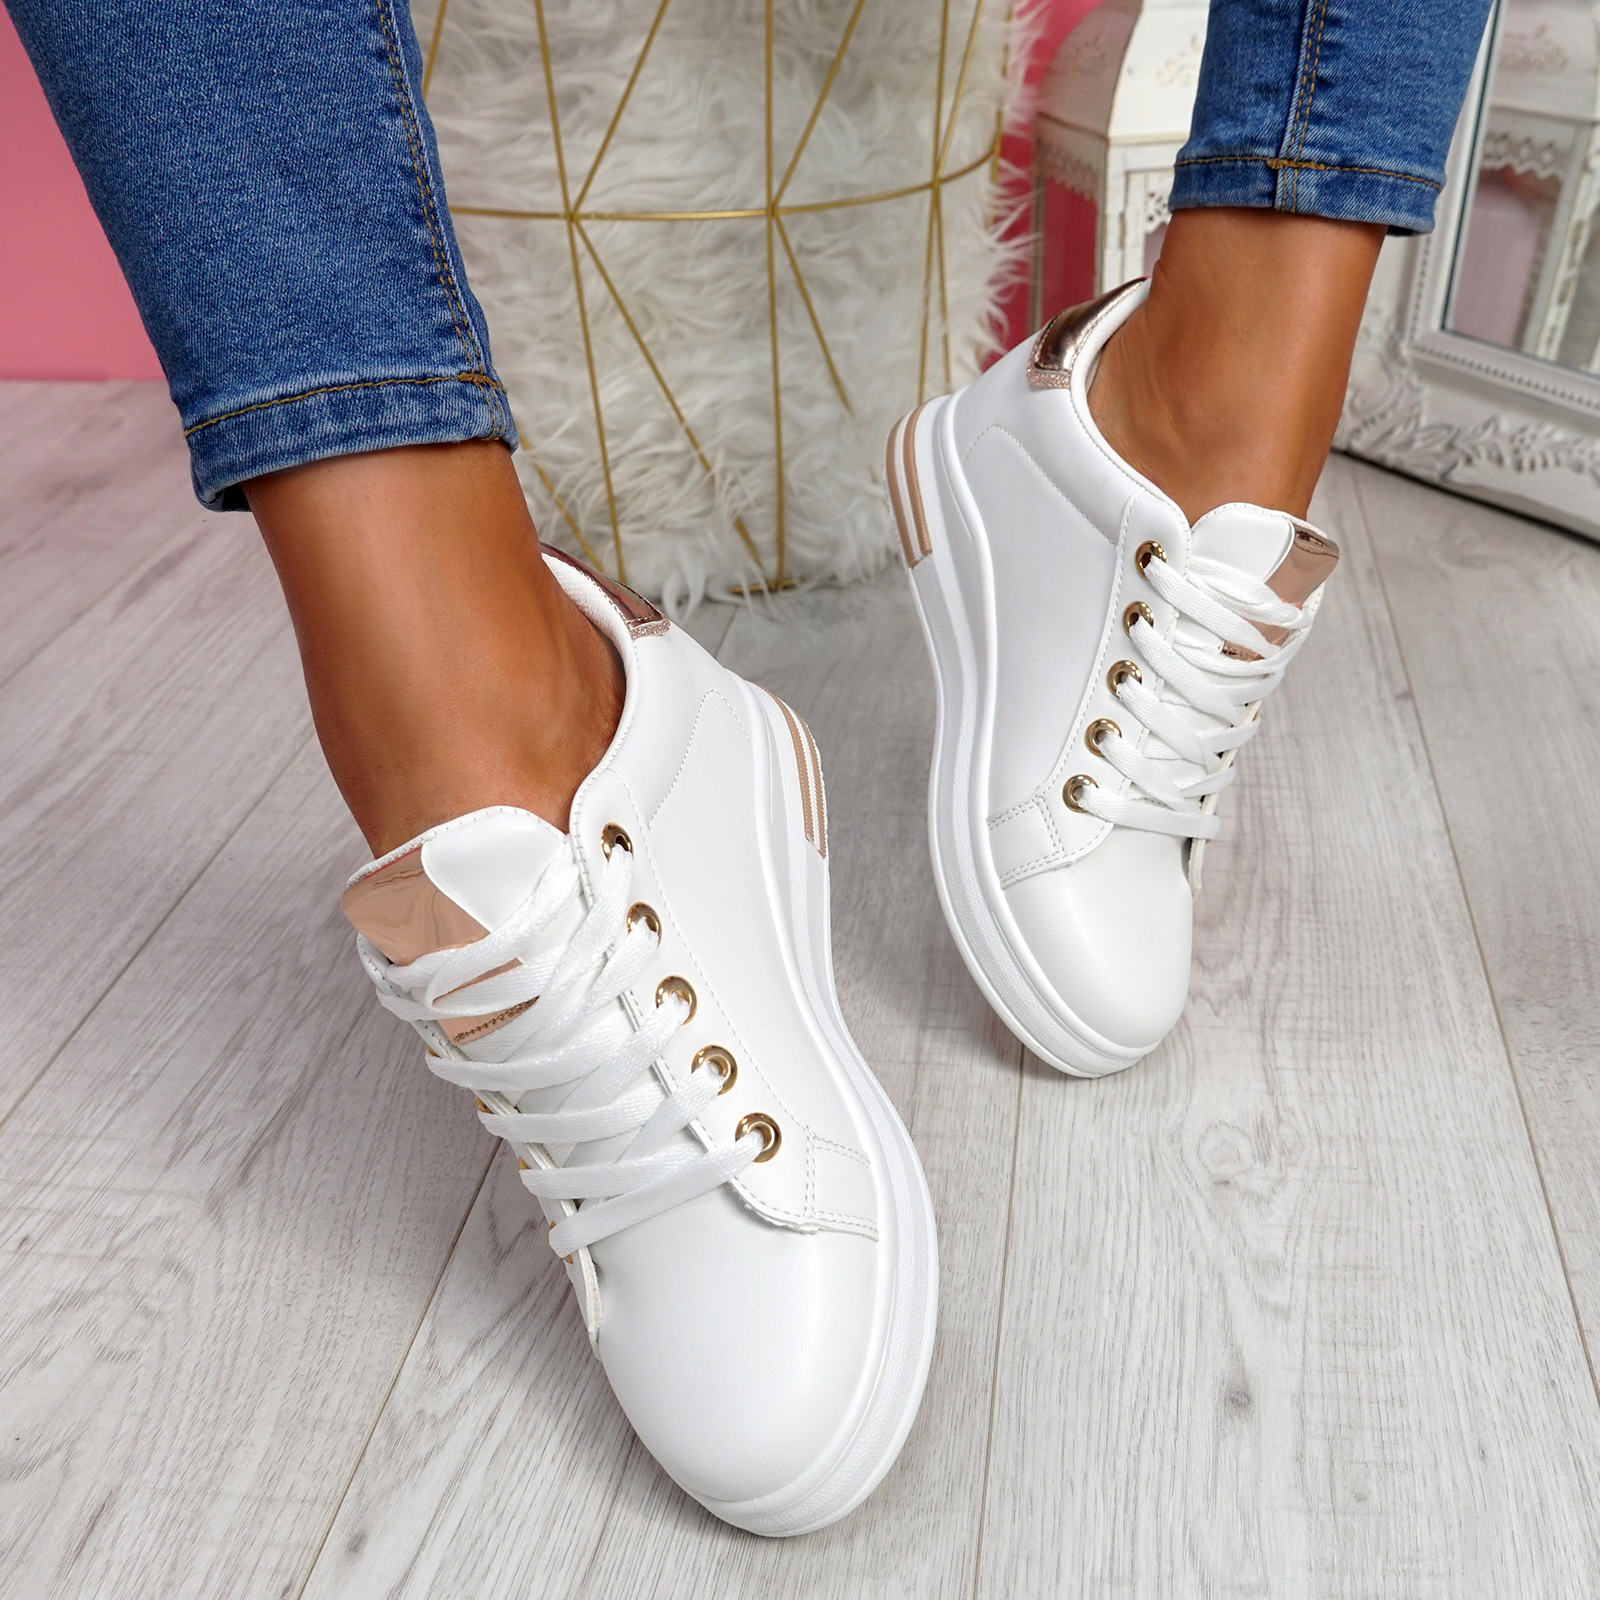 WOMENS LADIES WEDGE TRAINERS LACE UP SLIP ON PARTY SNEAKERS WOMEN SHOES SIZE UK | eBay